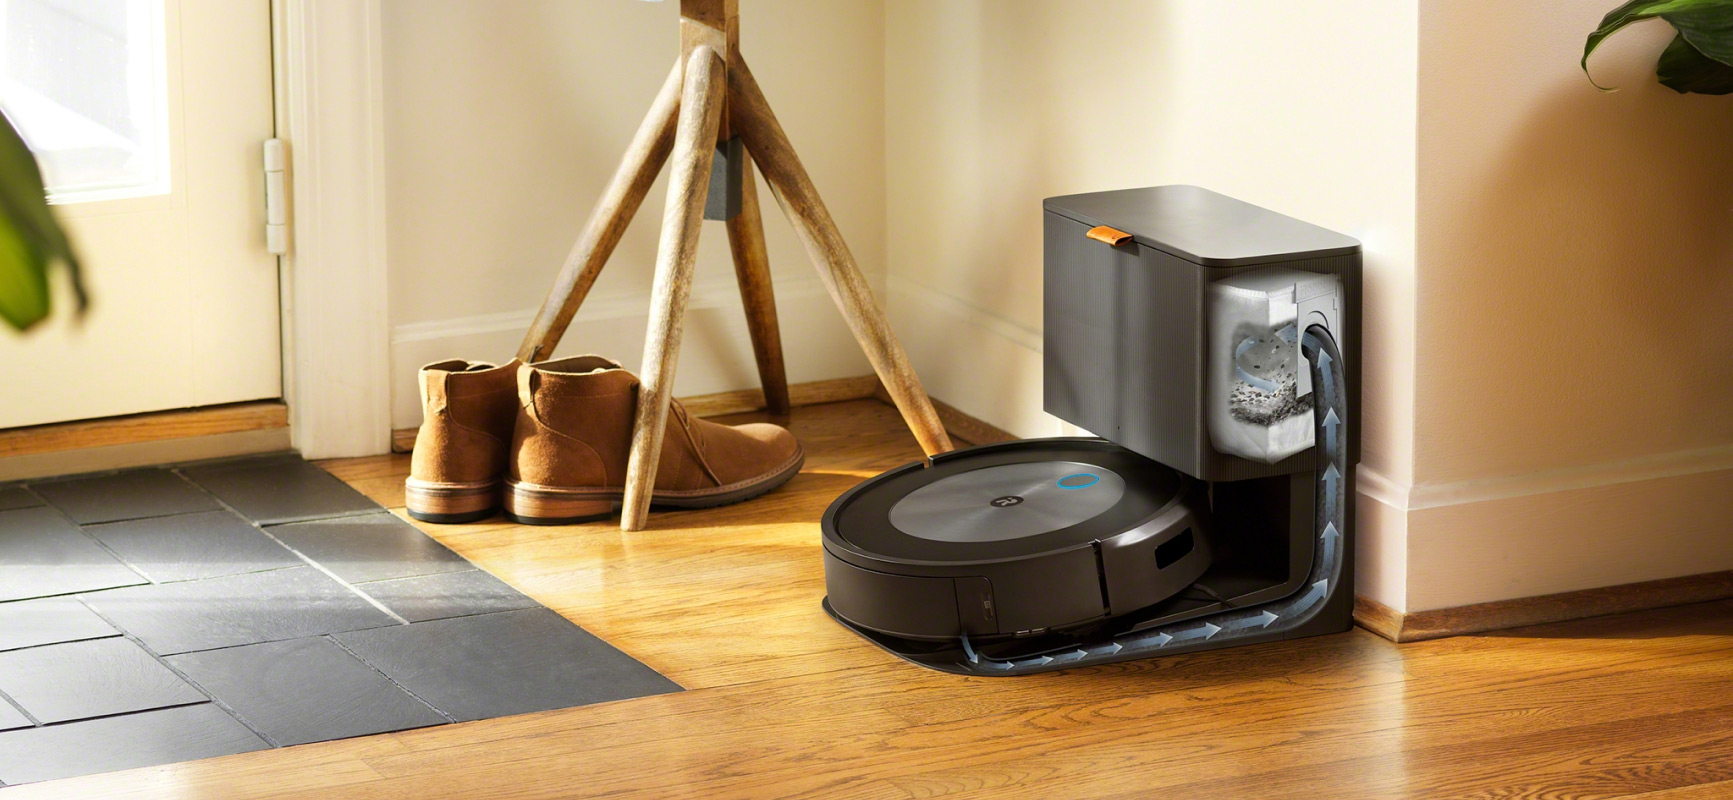 iRobot Roomba s9+ Wi-Fi Connected Robot Vacuum with Automatic Dirt Disposal